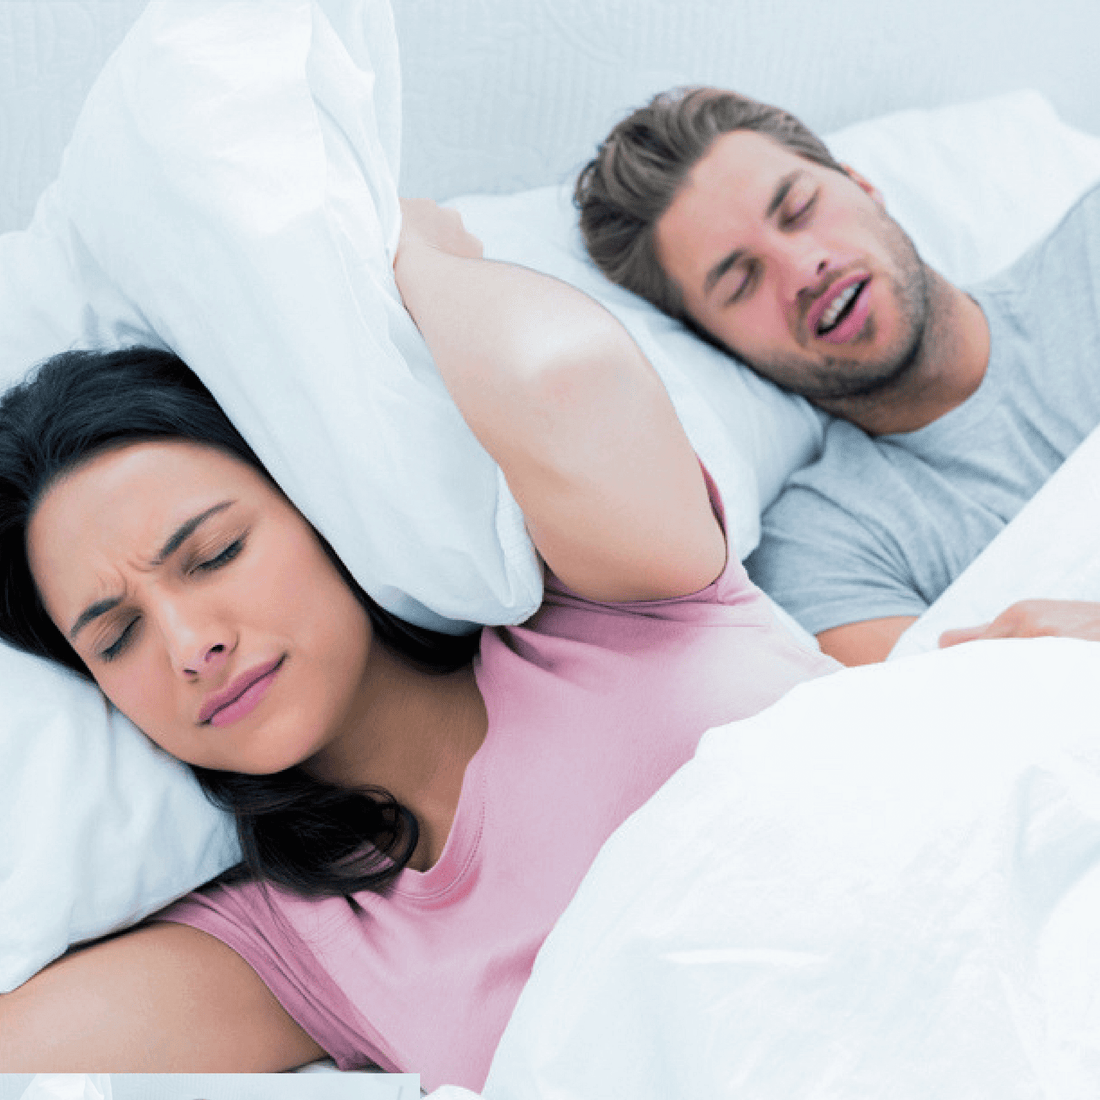 A woman annoyed by her husband's snoring